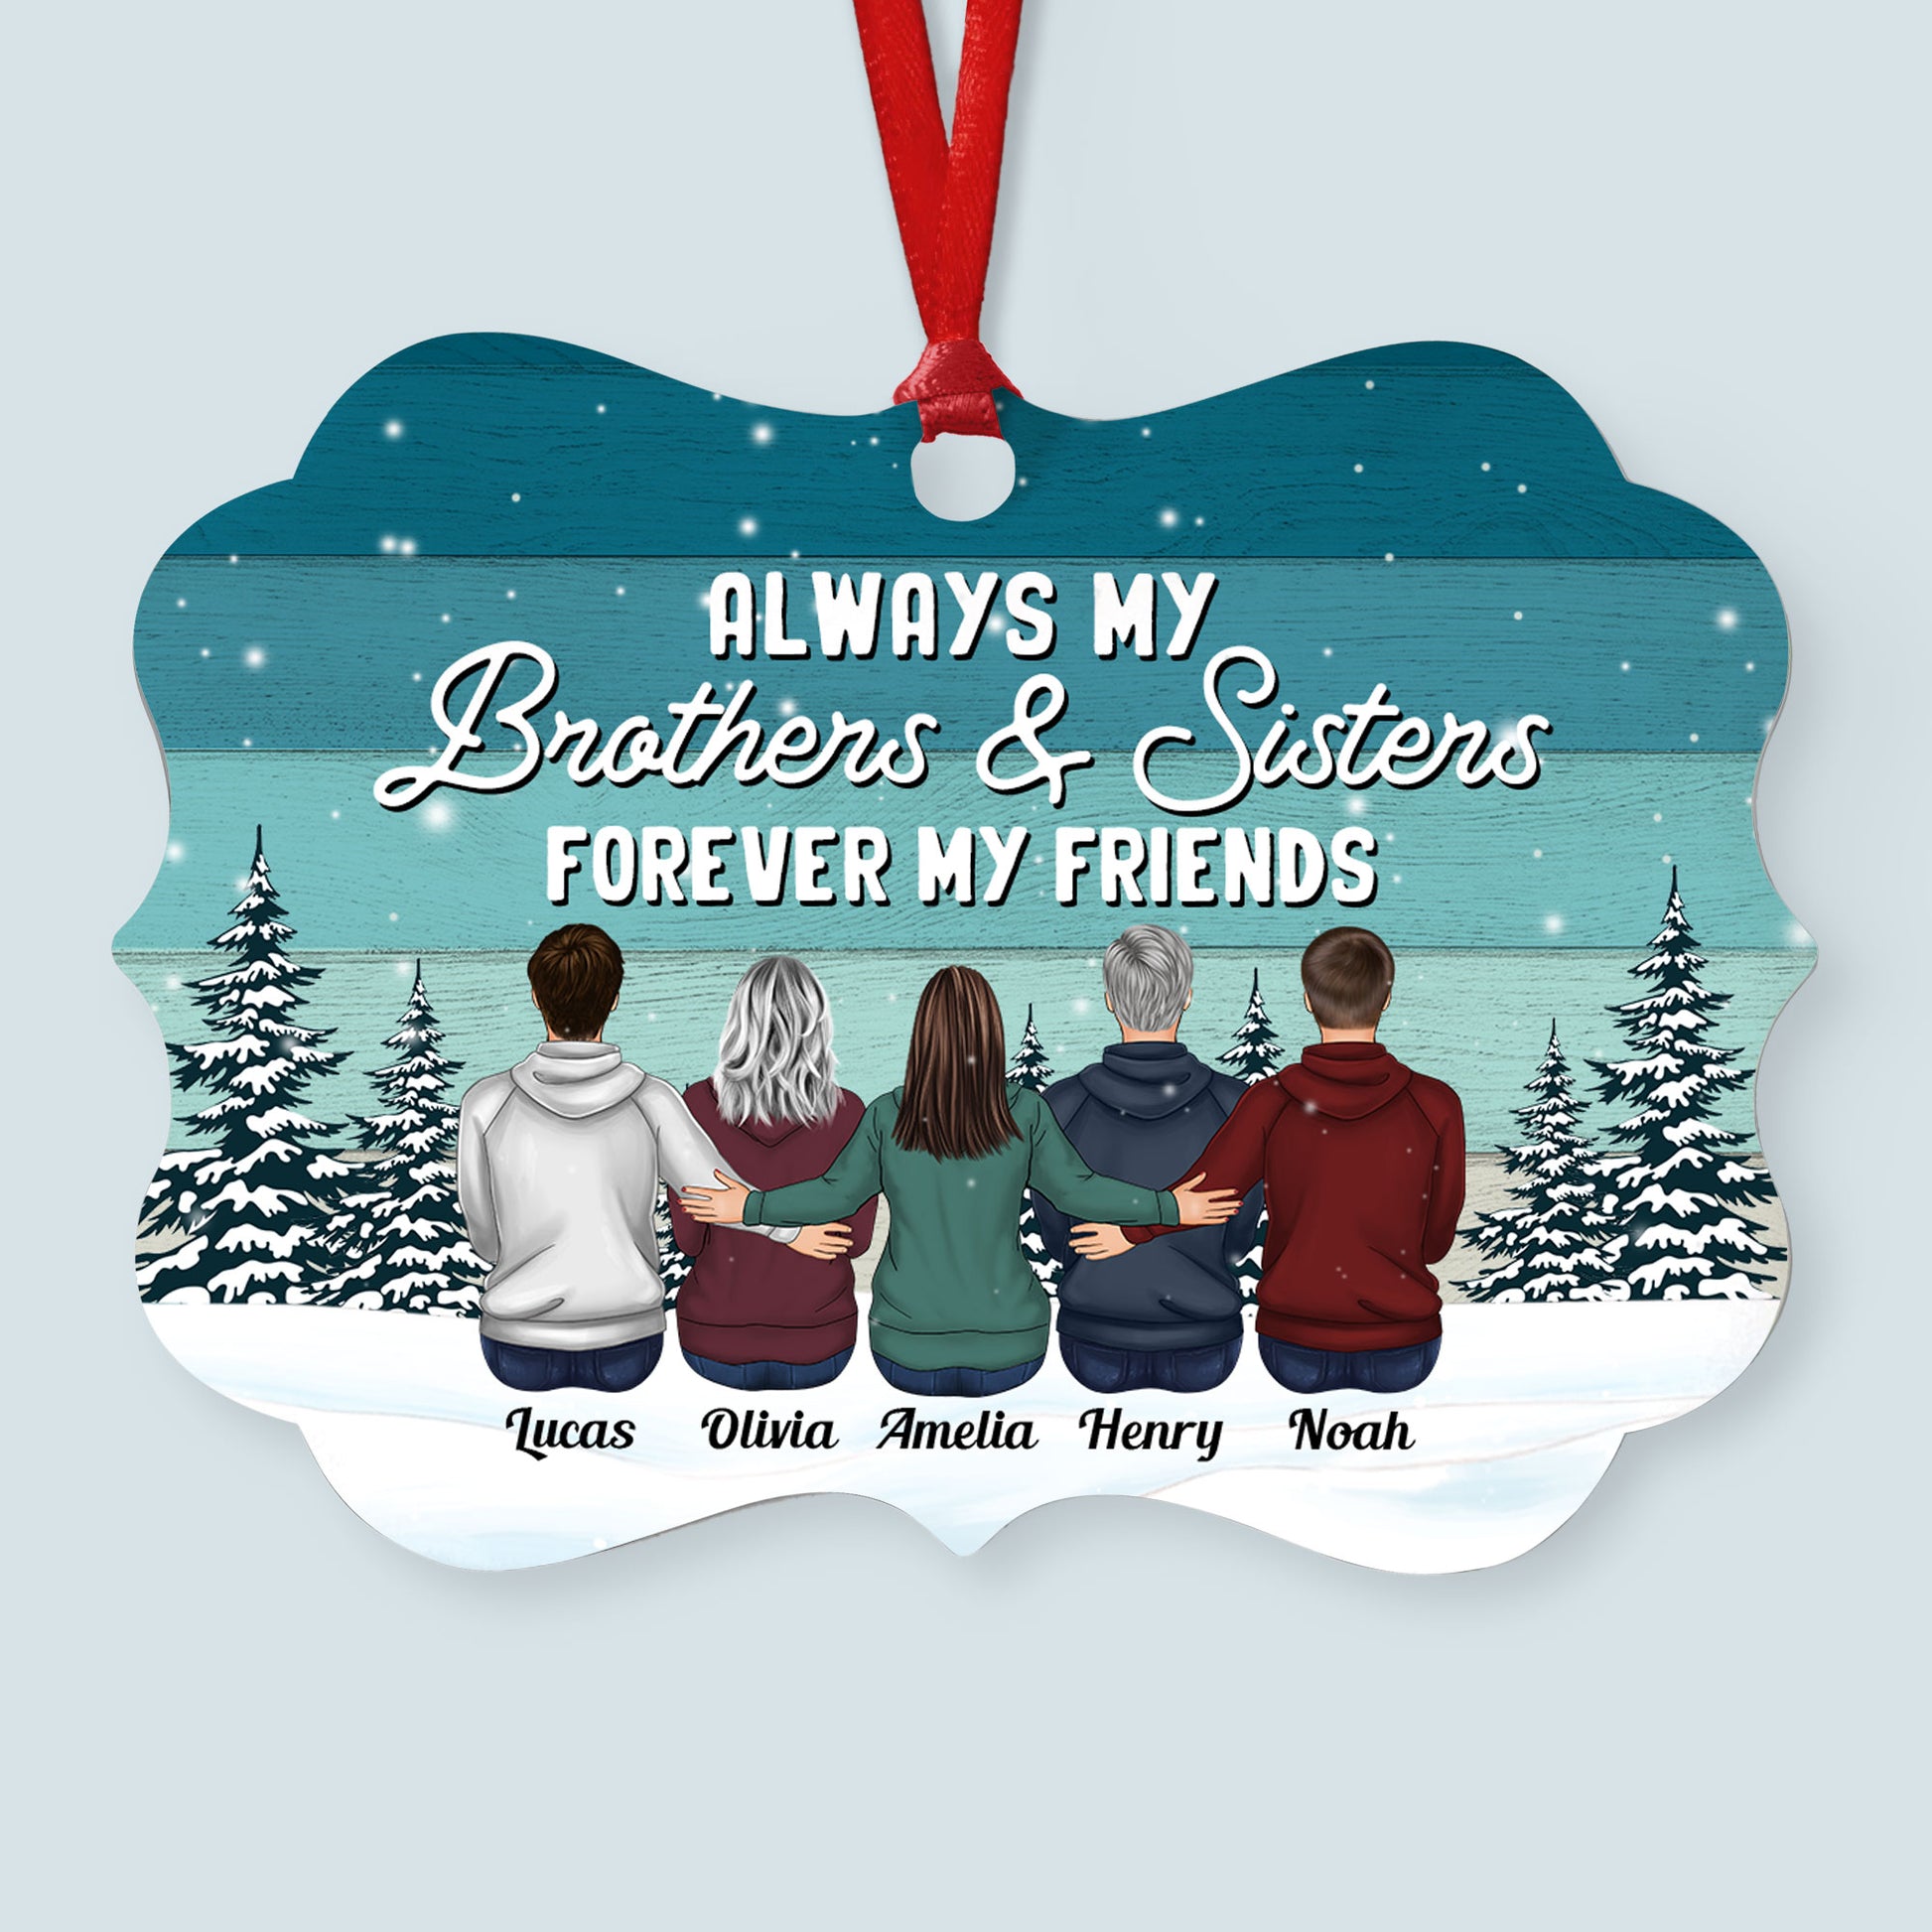 Brothers & Sisters A Whole Lot Of Love 2 - Personalized Aluminum Ornament - Christmas Gift For Brothers & Sisters, Family - Hoodie Family